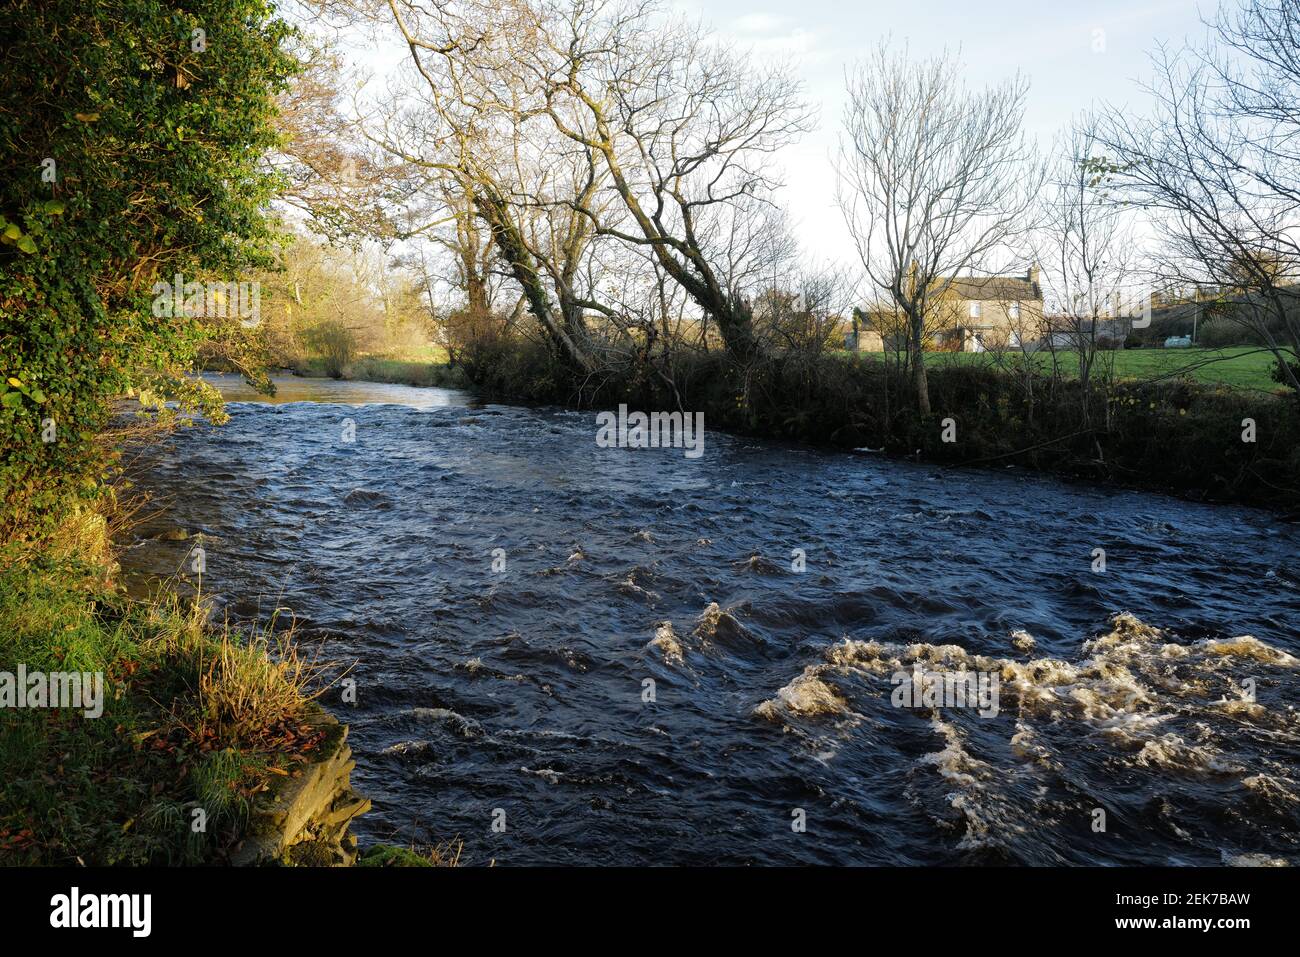 The Scottish River Doon in the Ayrshire village of Dalrymple in winter Stock Photo